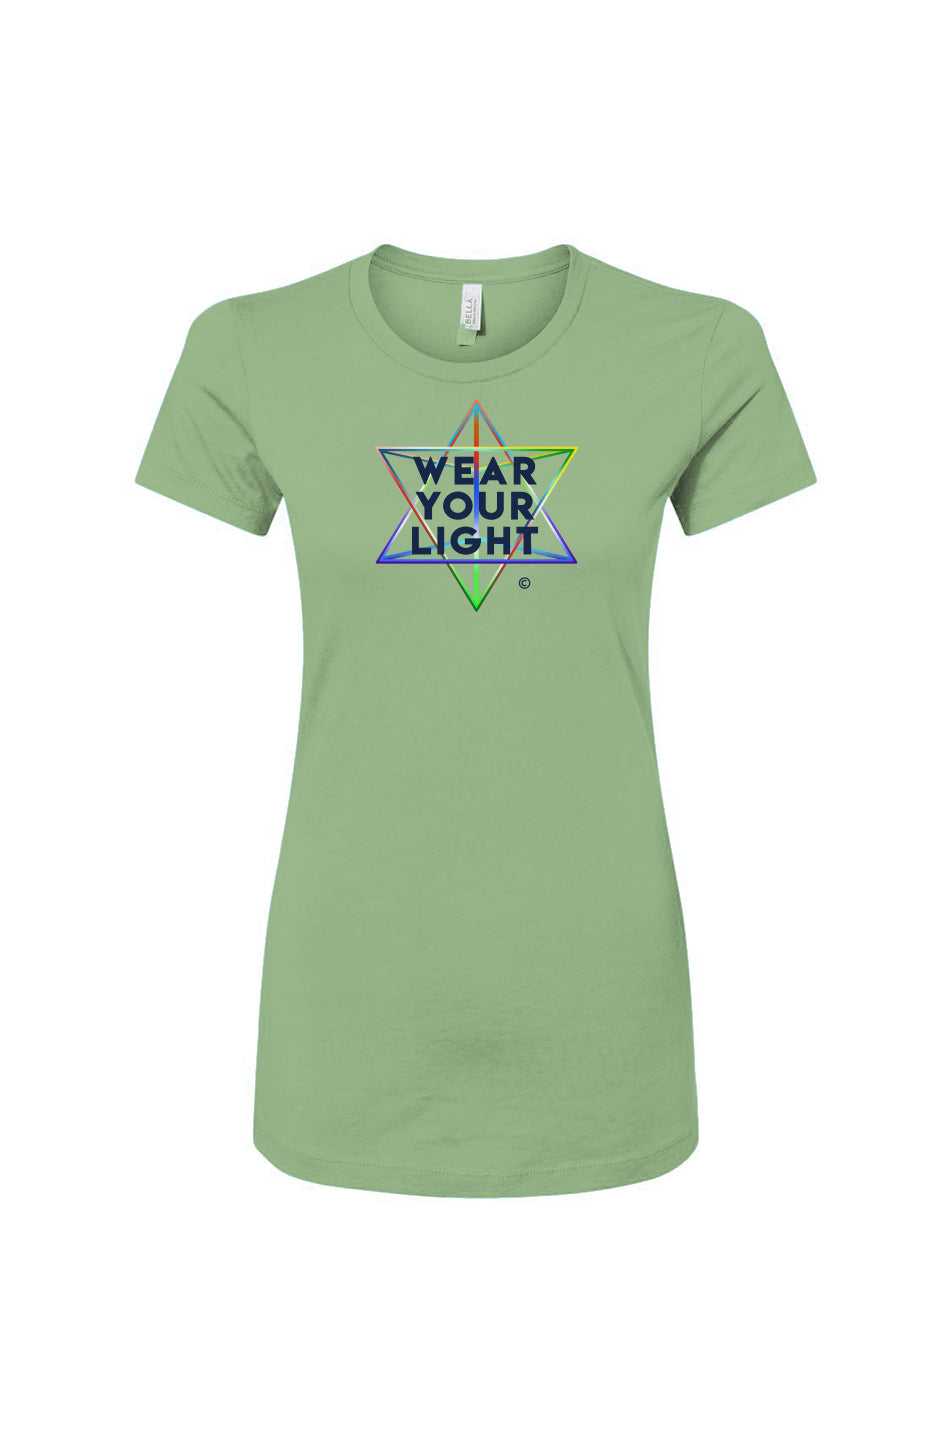 the wyl collection: women's t-shirt